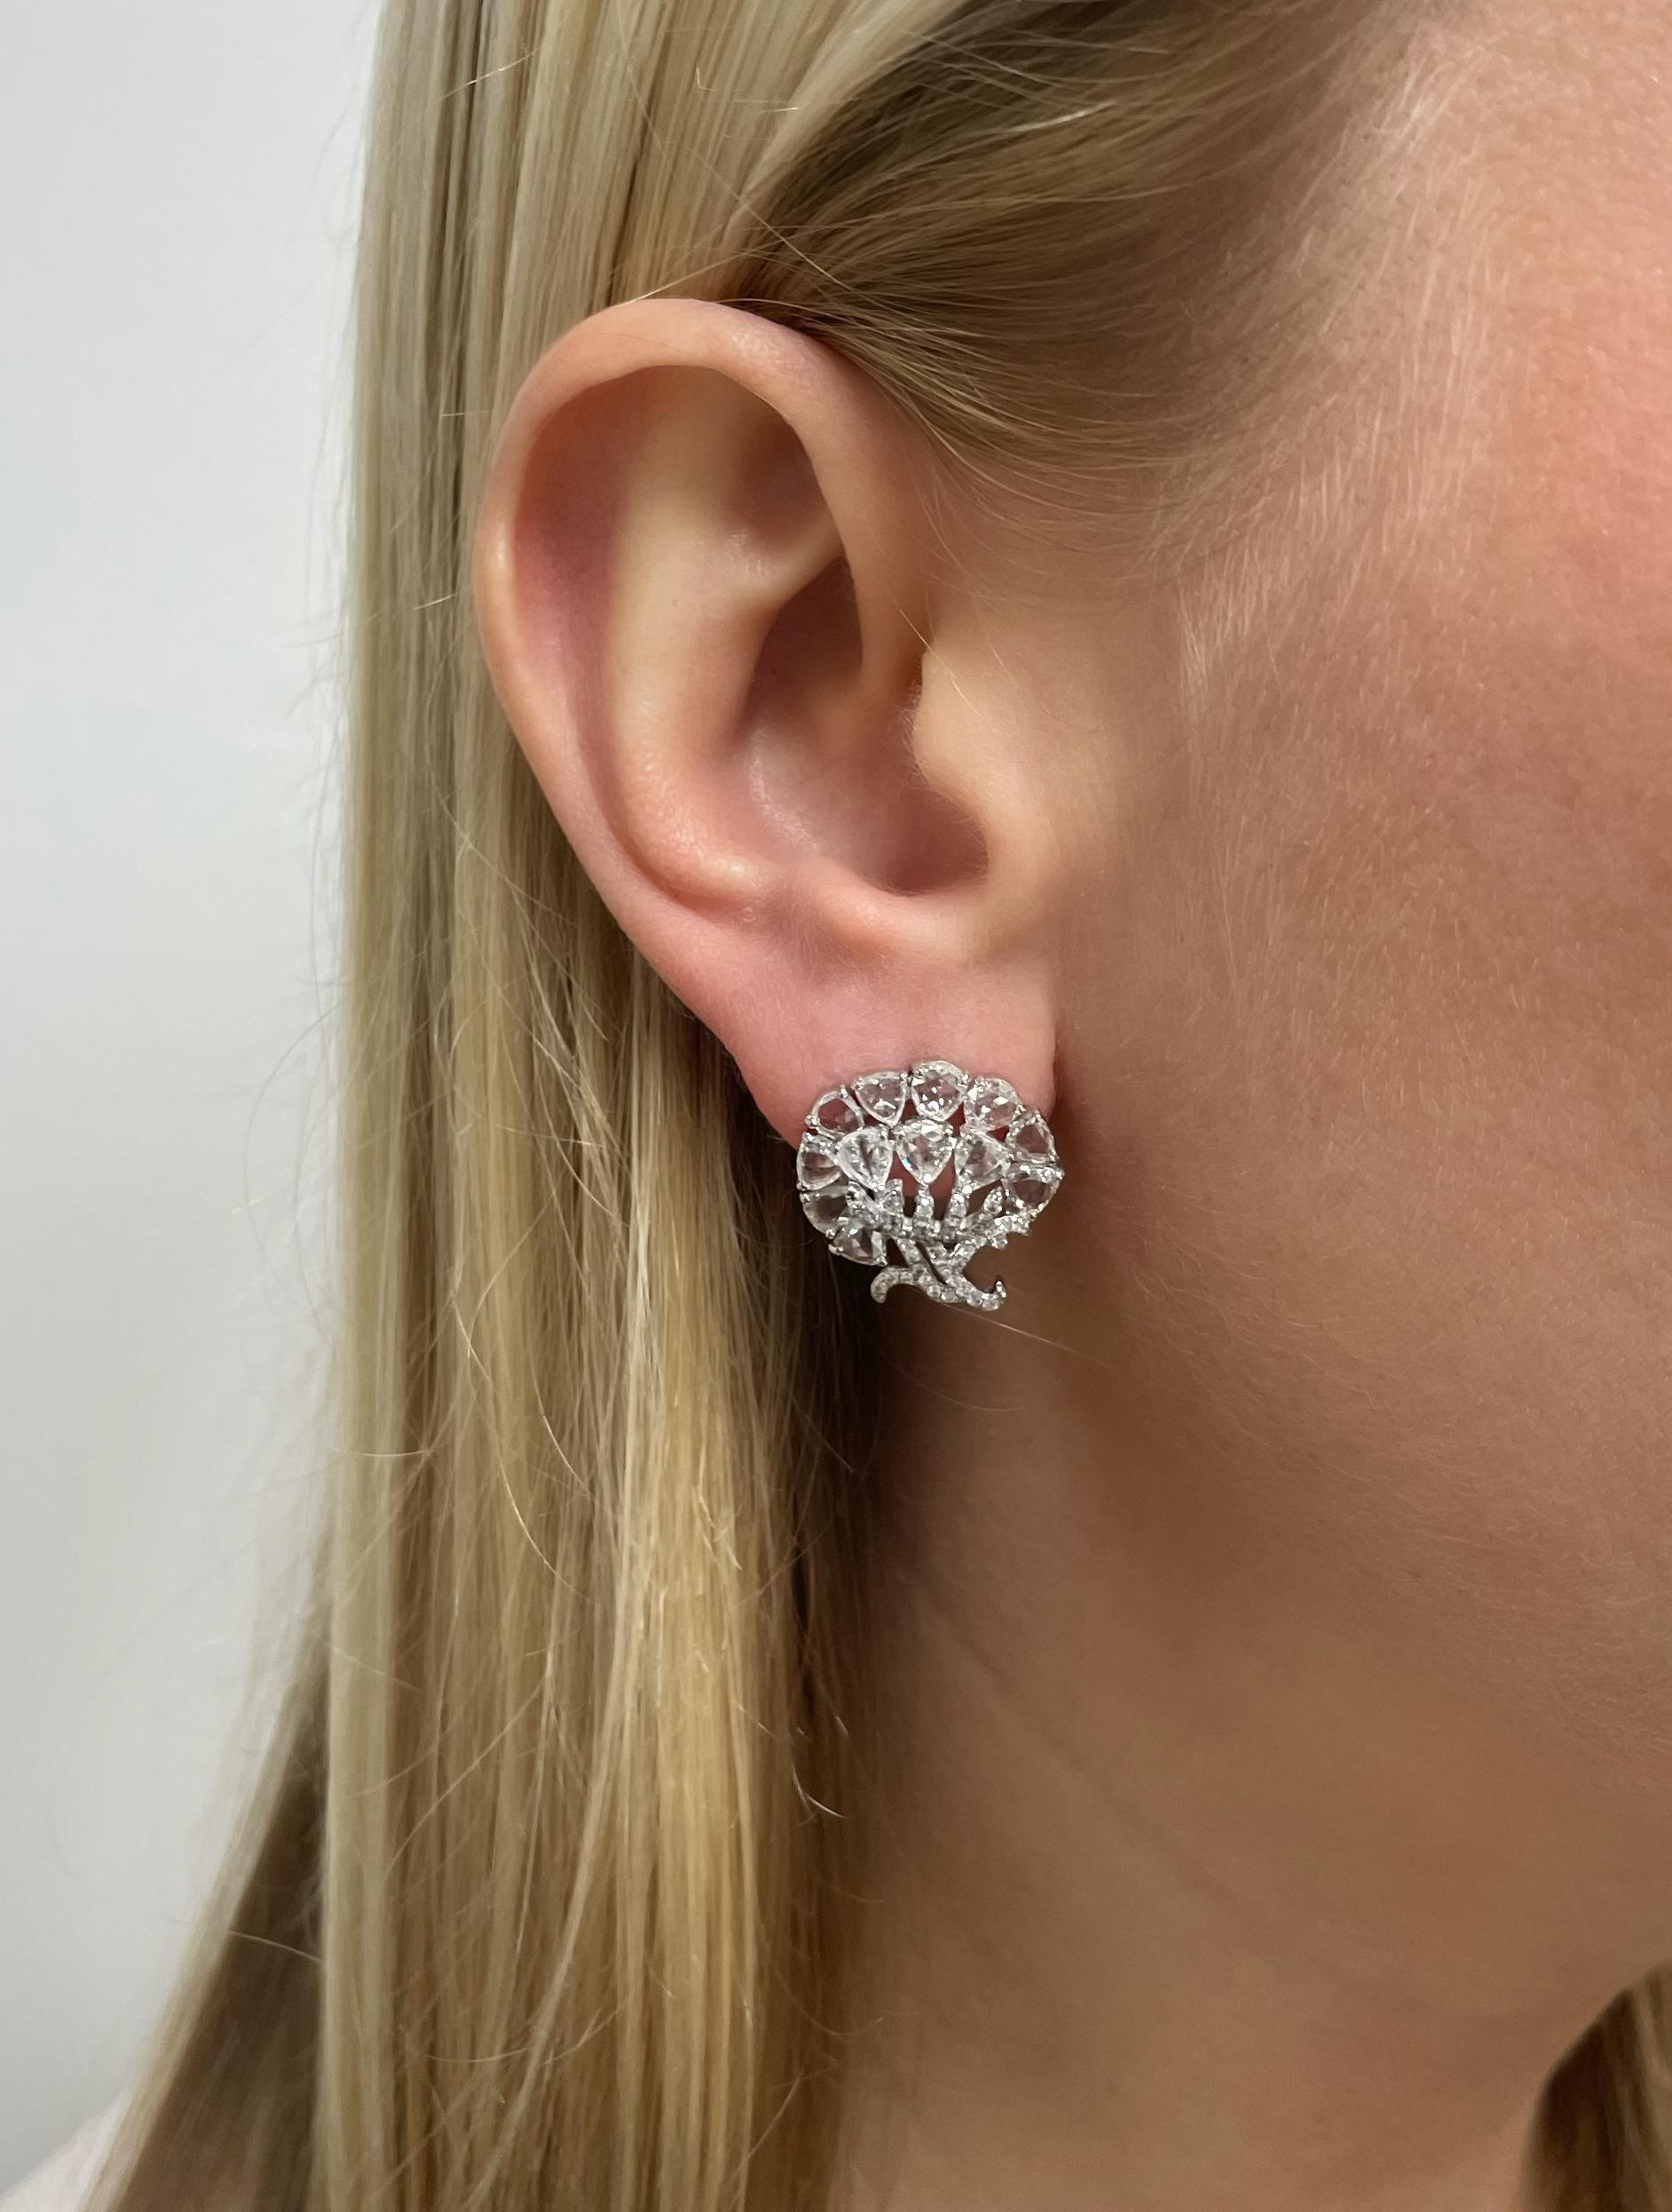 These light and airy flower earrings contain an array of pear shaped rose cut diamond petals and round brilliant cut diamond leaves and stem. Mounted in 18 karat white gold, these beautifully made earrings are perfect for any occasion!

Diamond